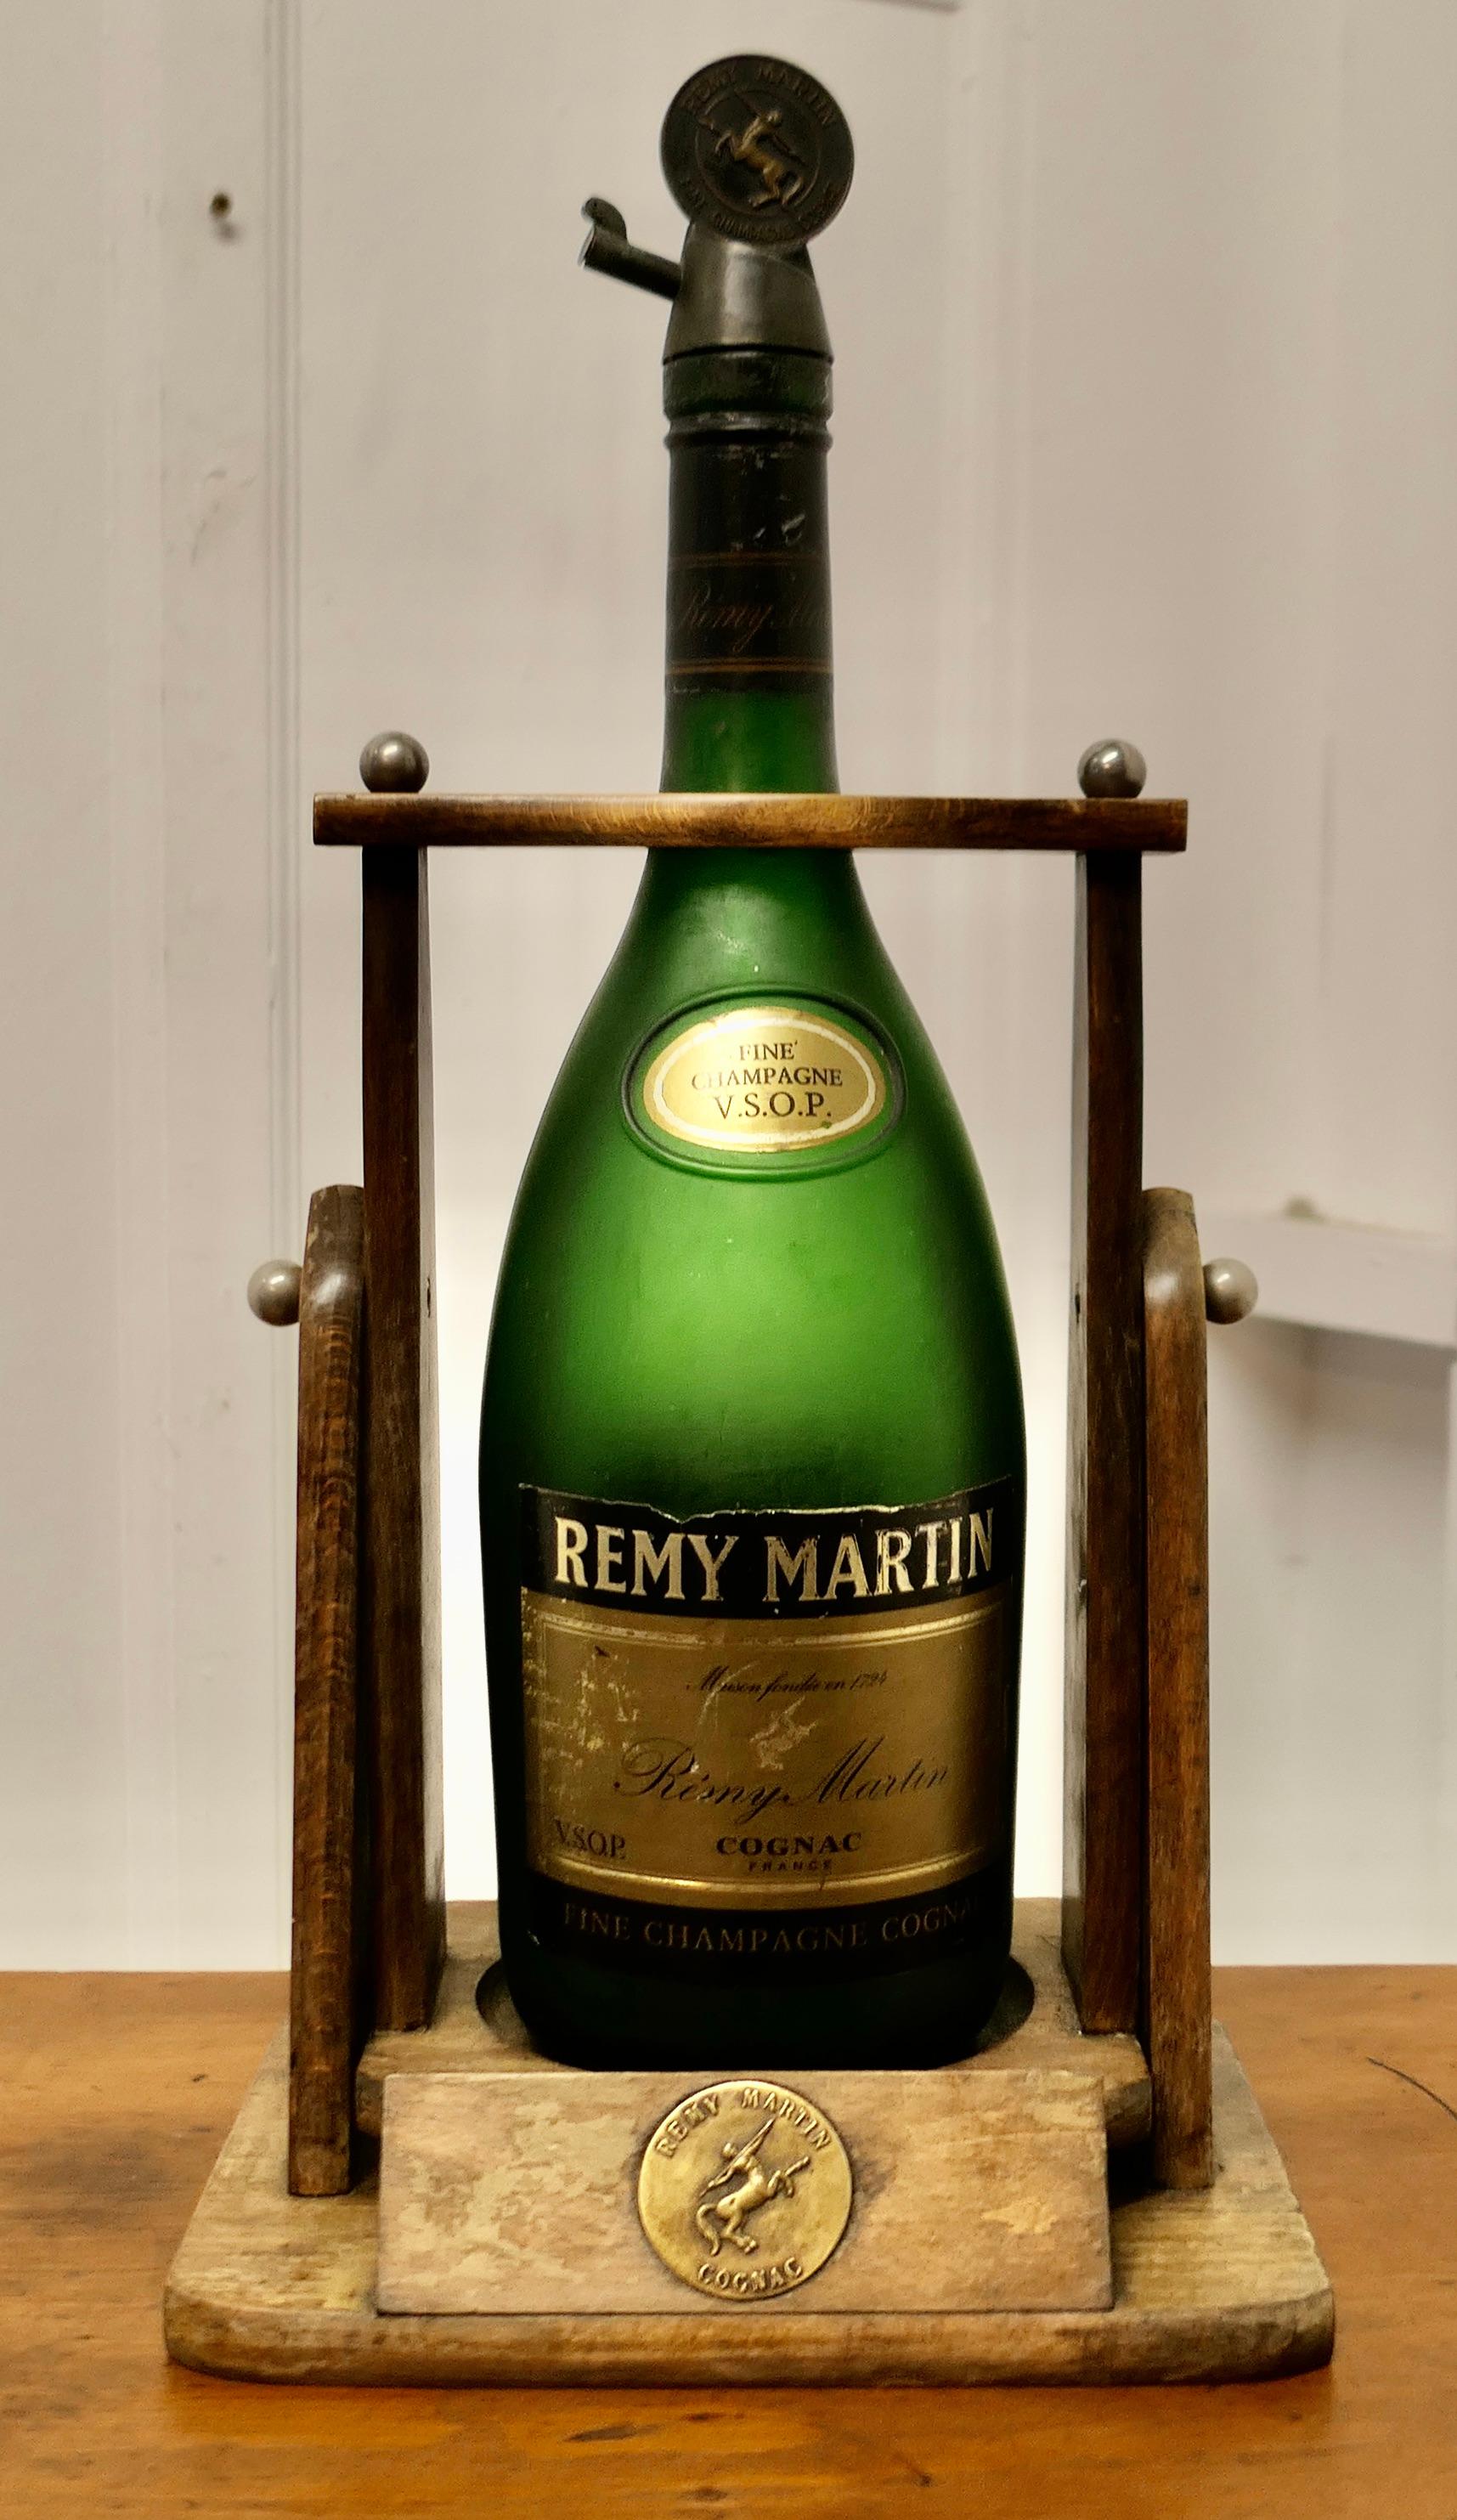 A Rare Vintage Remy Martin 3 Litre Bottle with Original Cradle Pouring Stand

A Rare piece, this would have been used for “dégustation” of the fine Champagne Cognac V.S.O.P. The Jeroboam tilts easily and pours out one measure  
This is a great piece